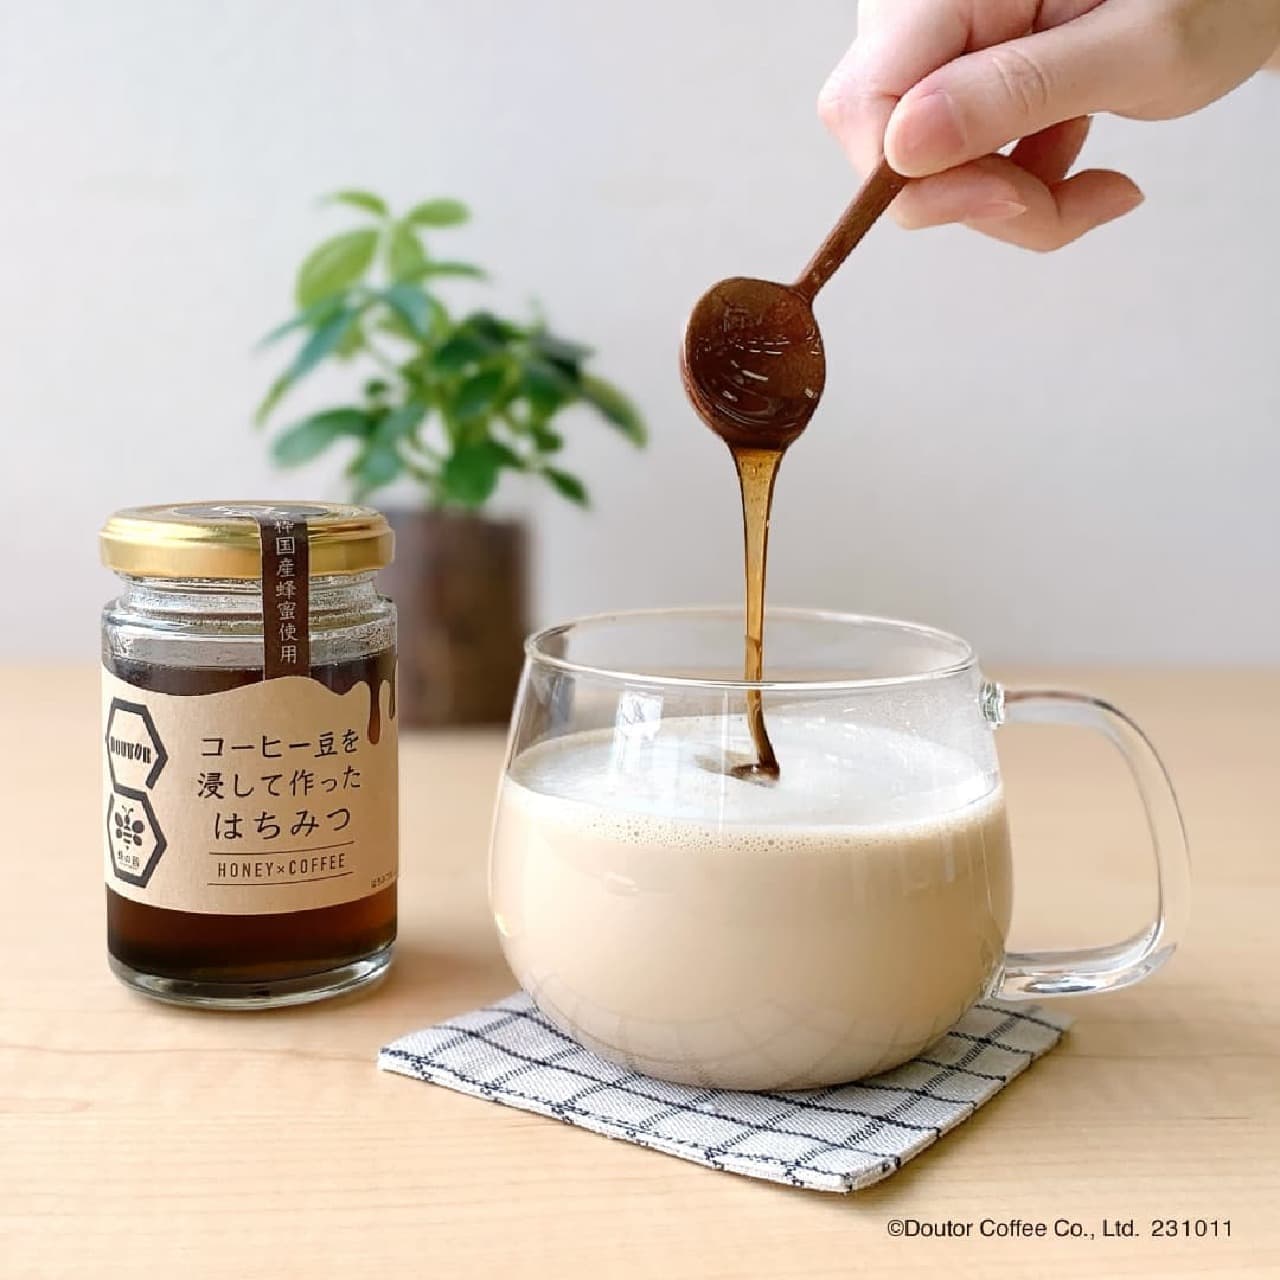 Doutor Online Shop "Honey made by soaking coffee beans